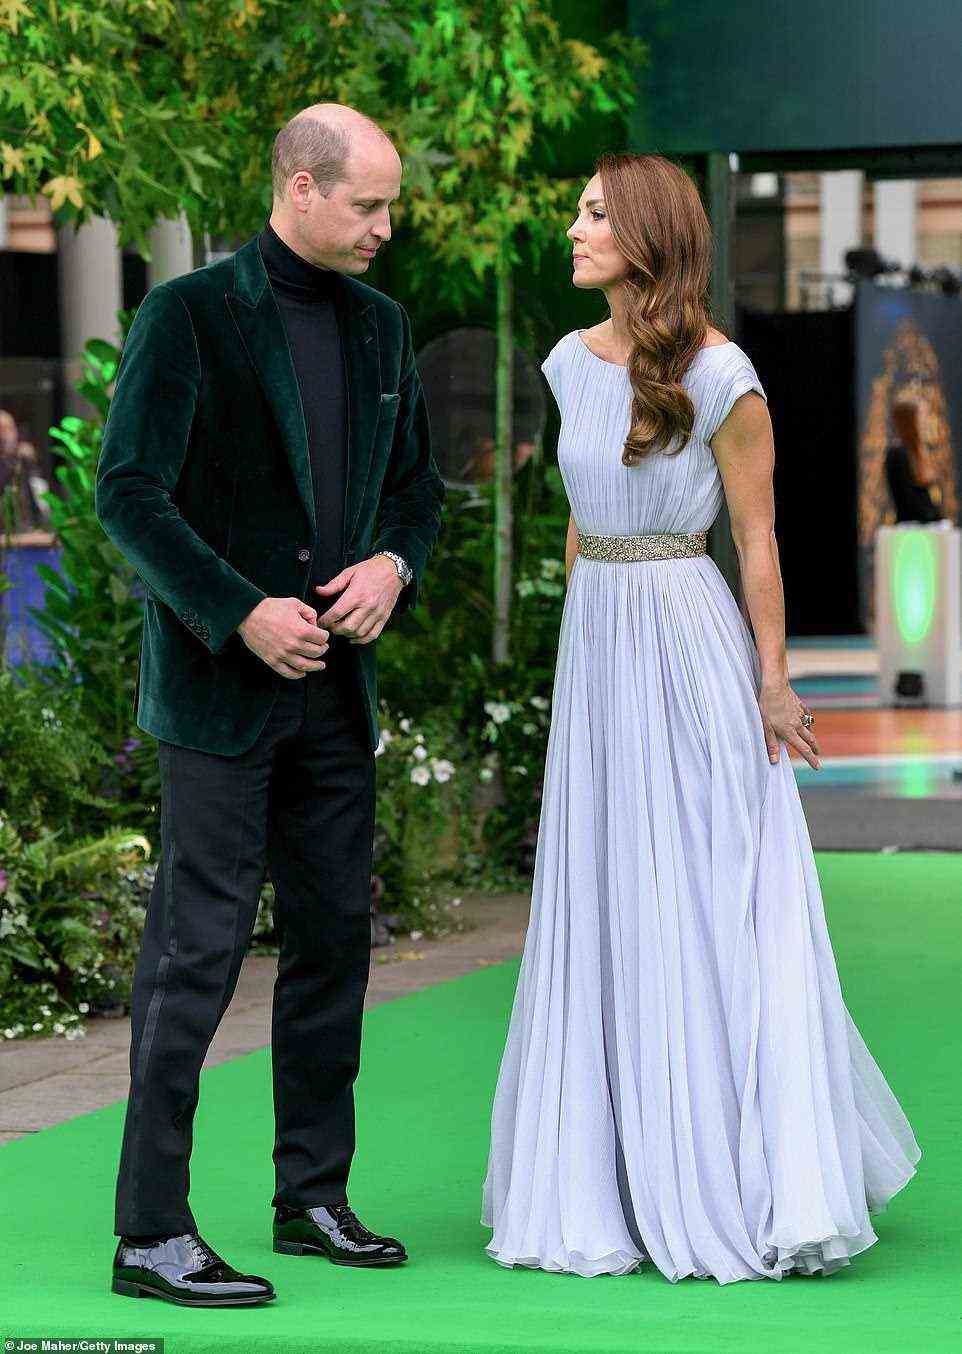 The couple gave each other a loving look on the green carpet as they headed to the inaugural awards